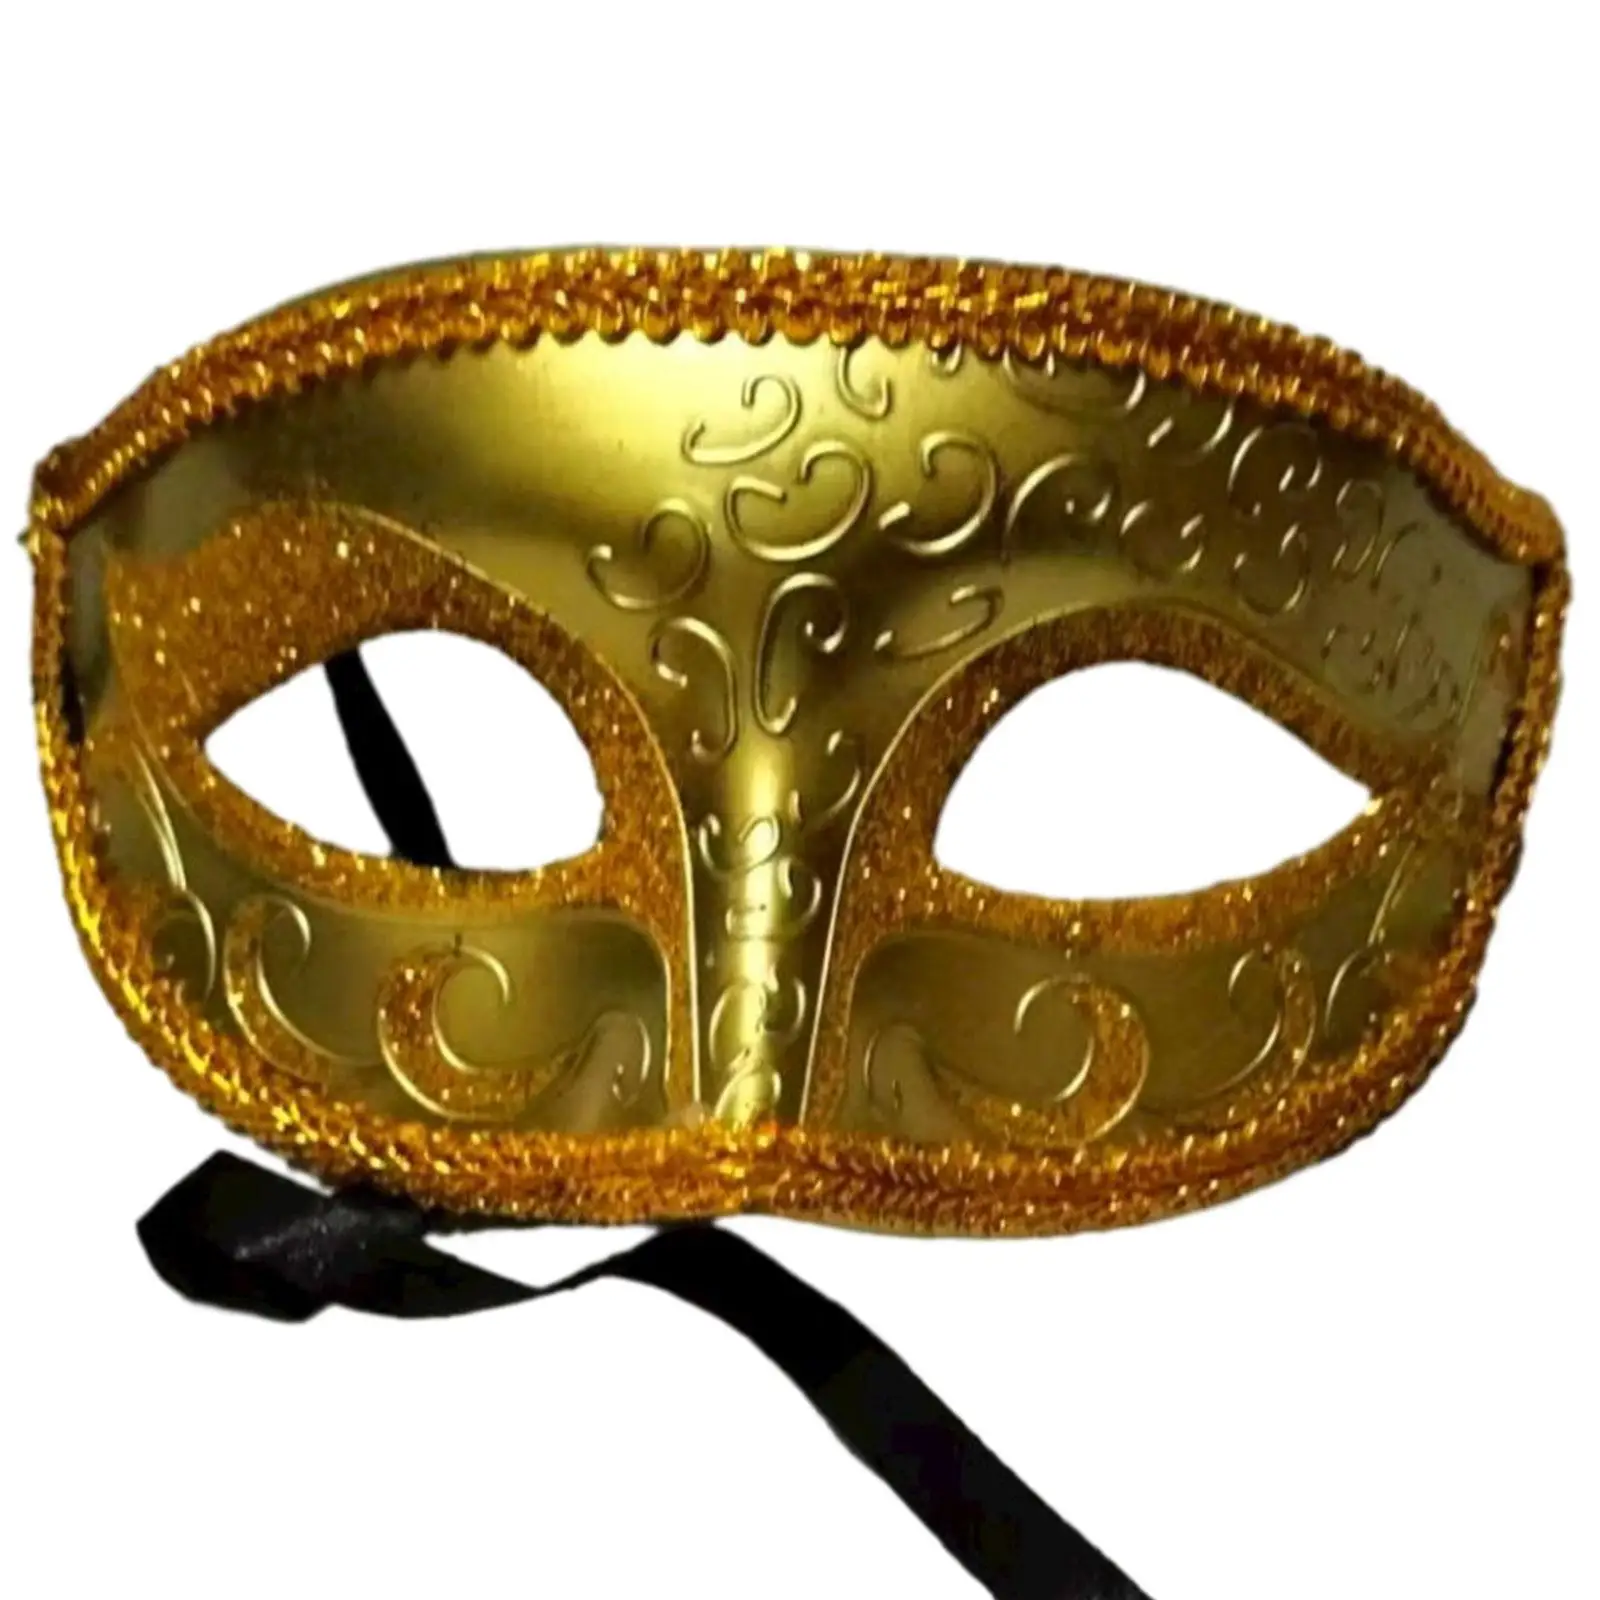 Masquerade Mask Costume Accessories for Club Carnival Fancy Dress